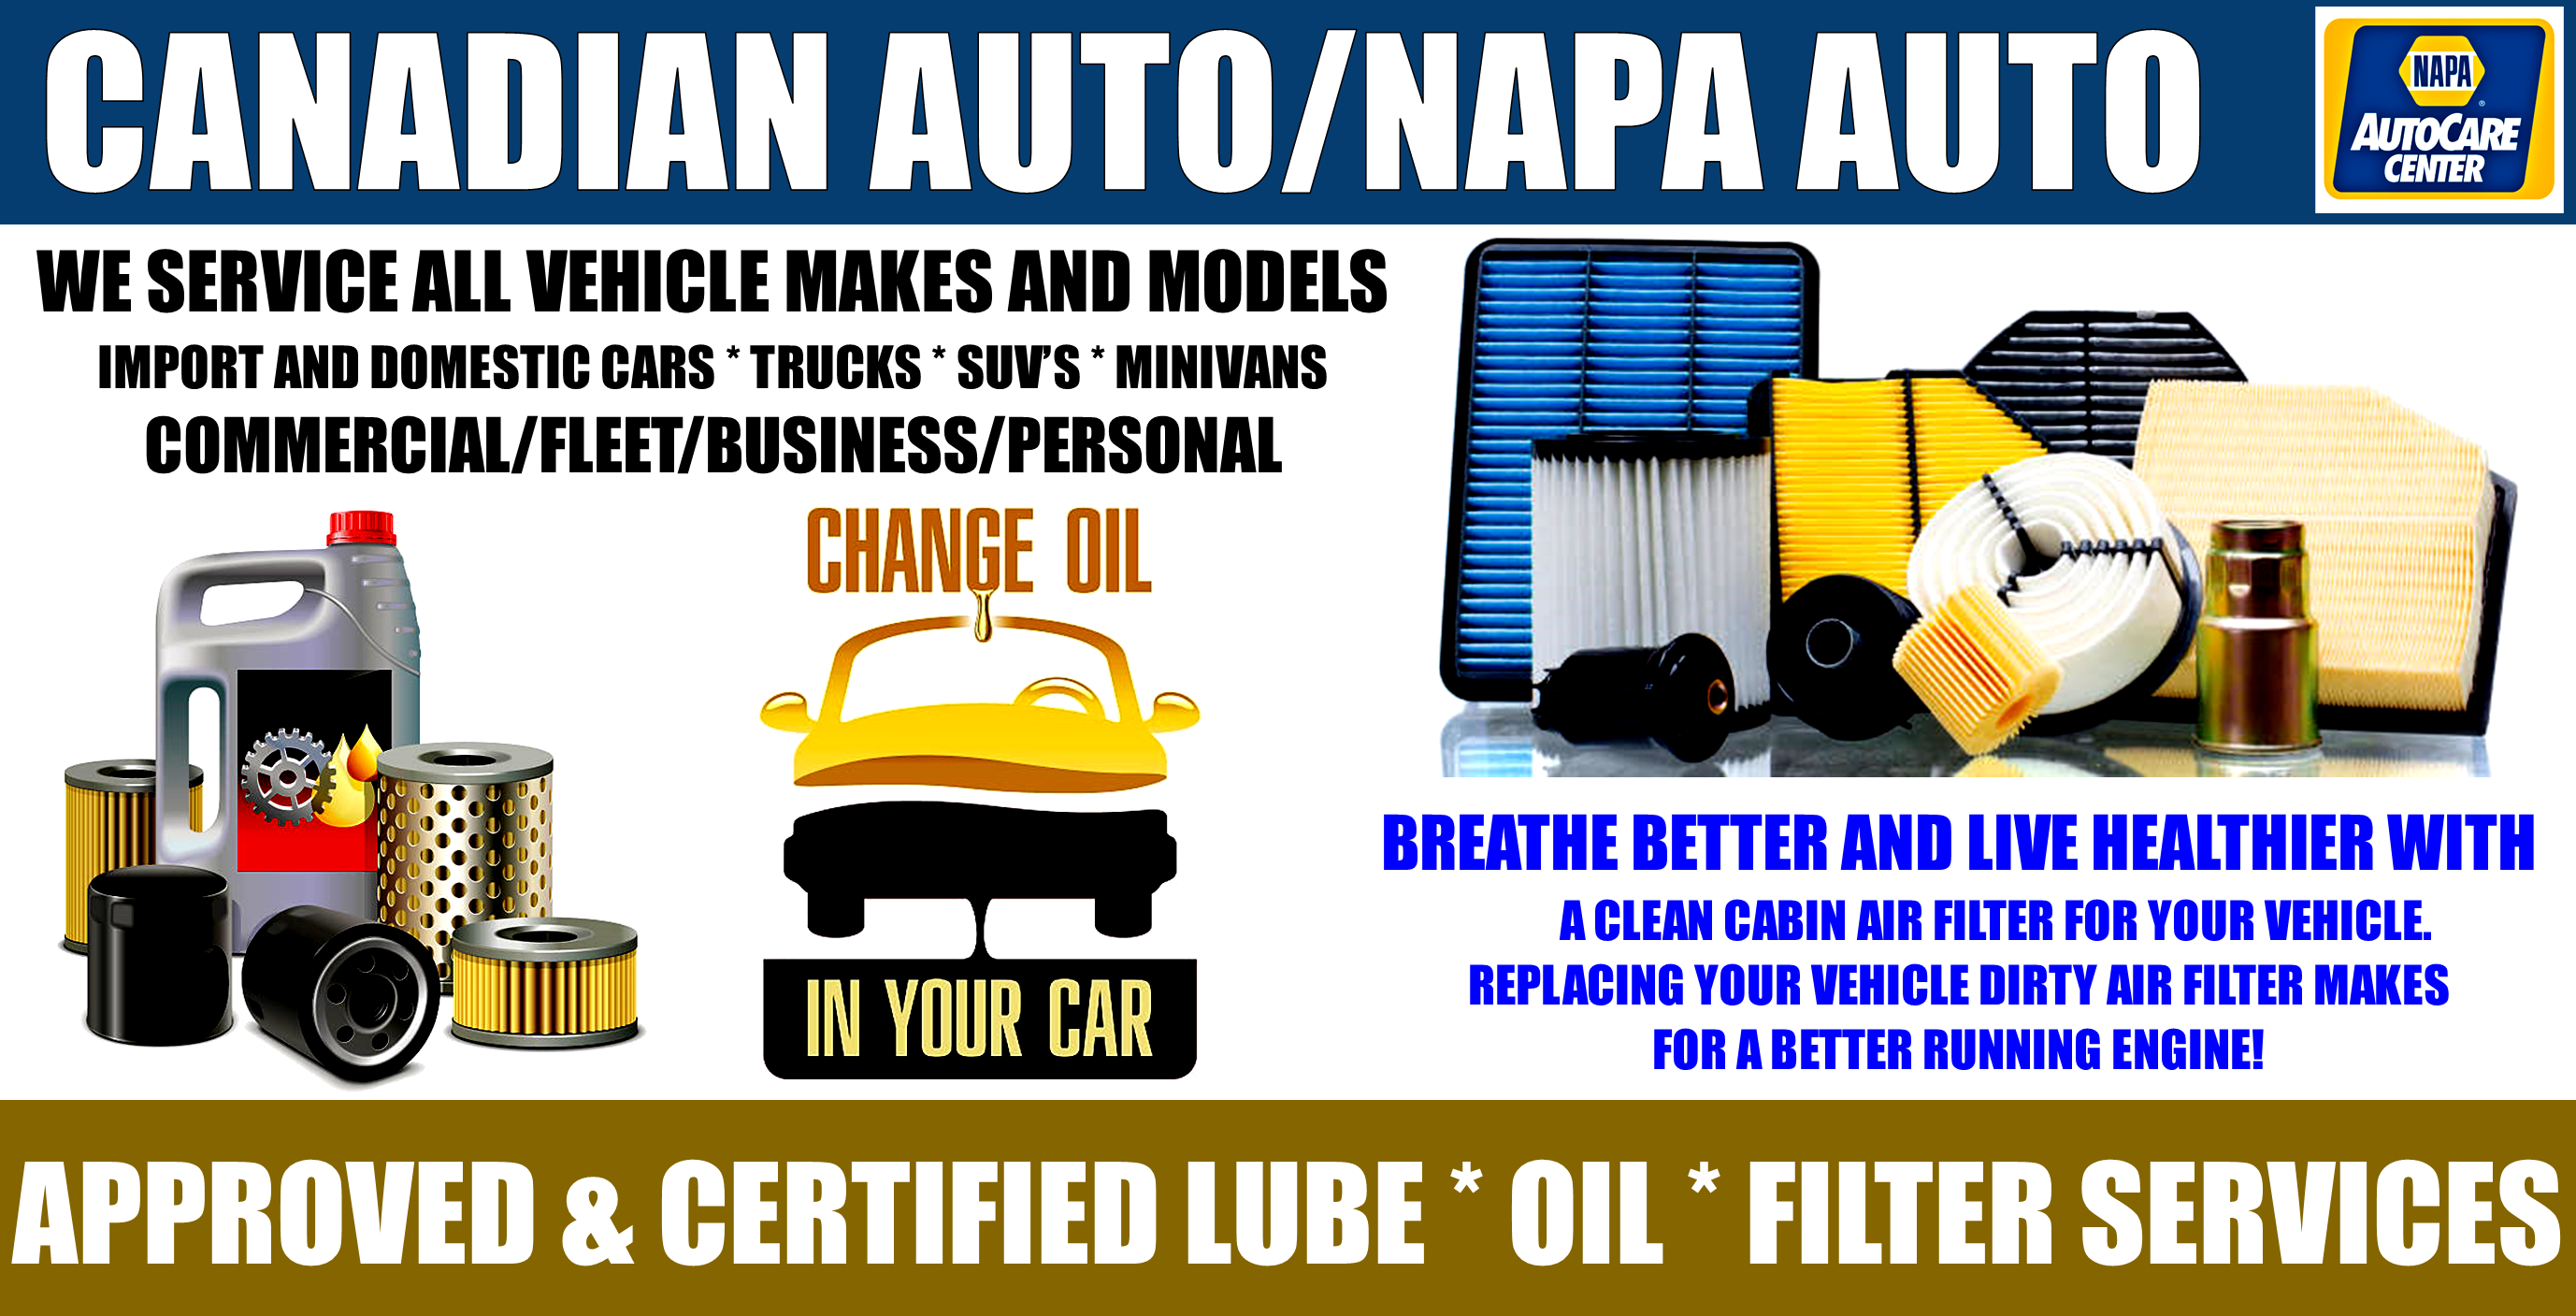 Canadian Auto/Napa Auto Care Centre provides Complete Lube / Oil / Filter Services on all vehicle maks and models